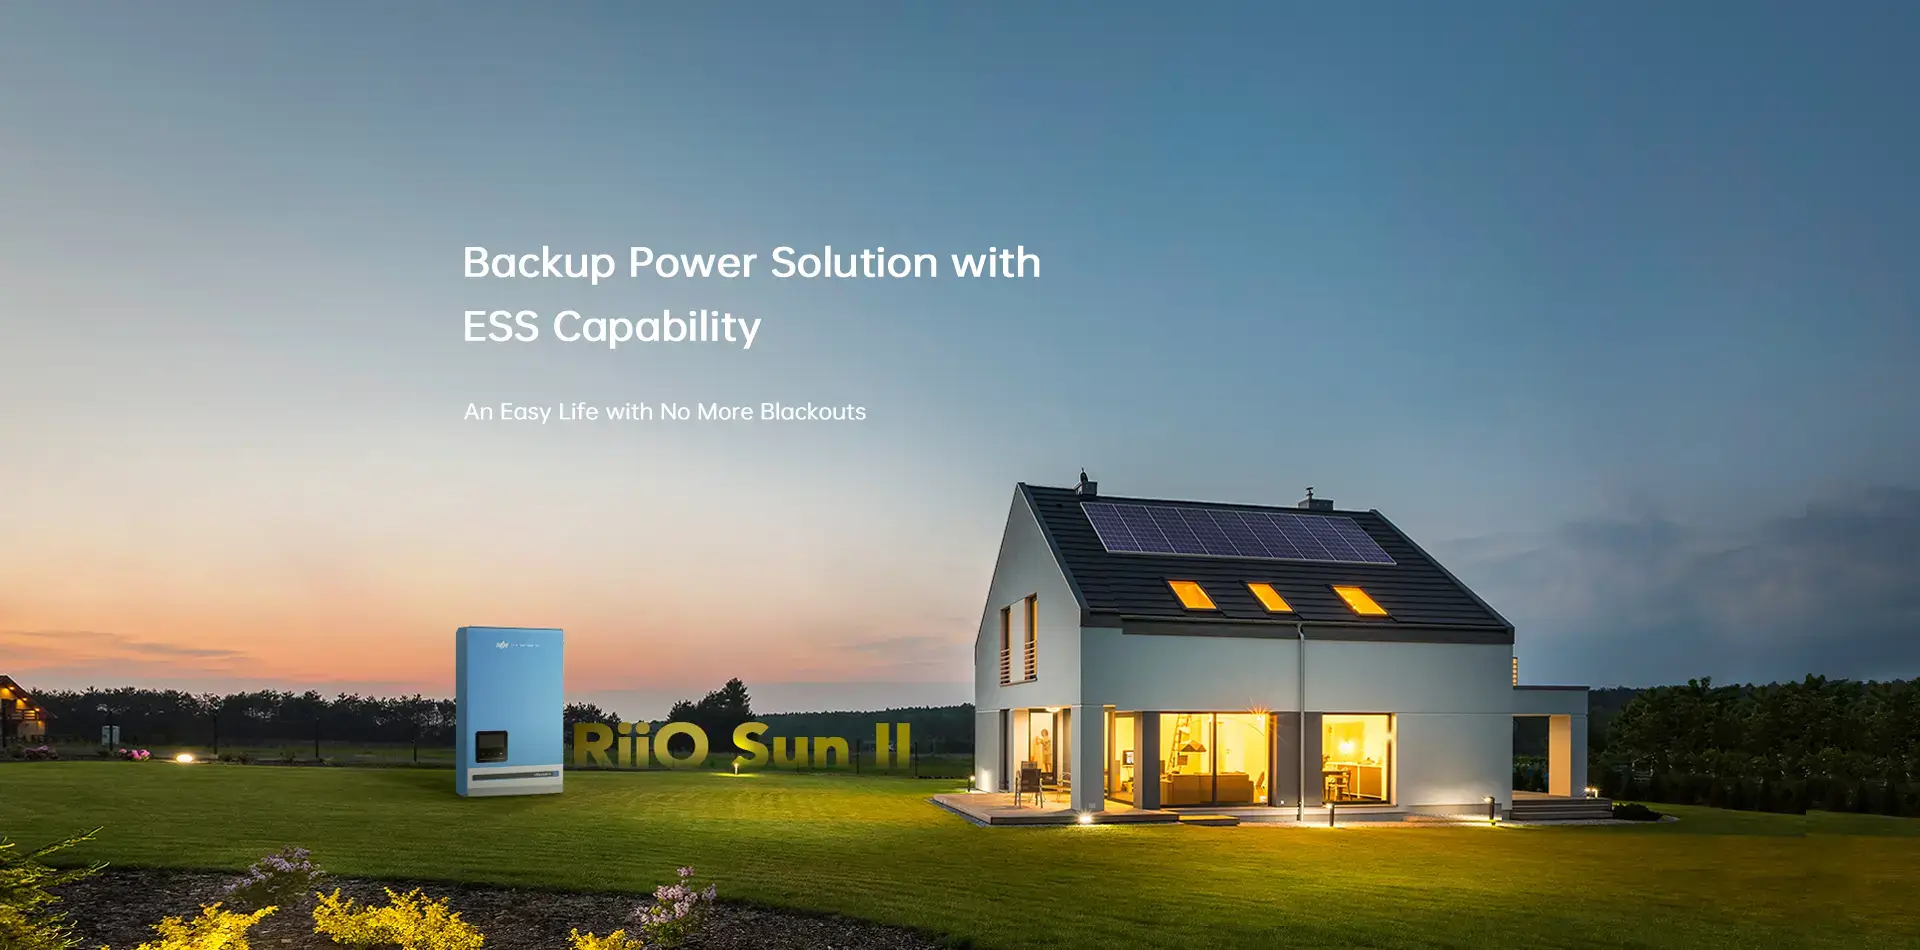 Backup Power Solution with ESS Capability